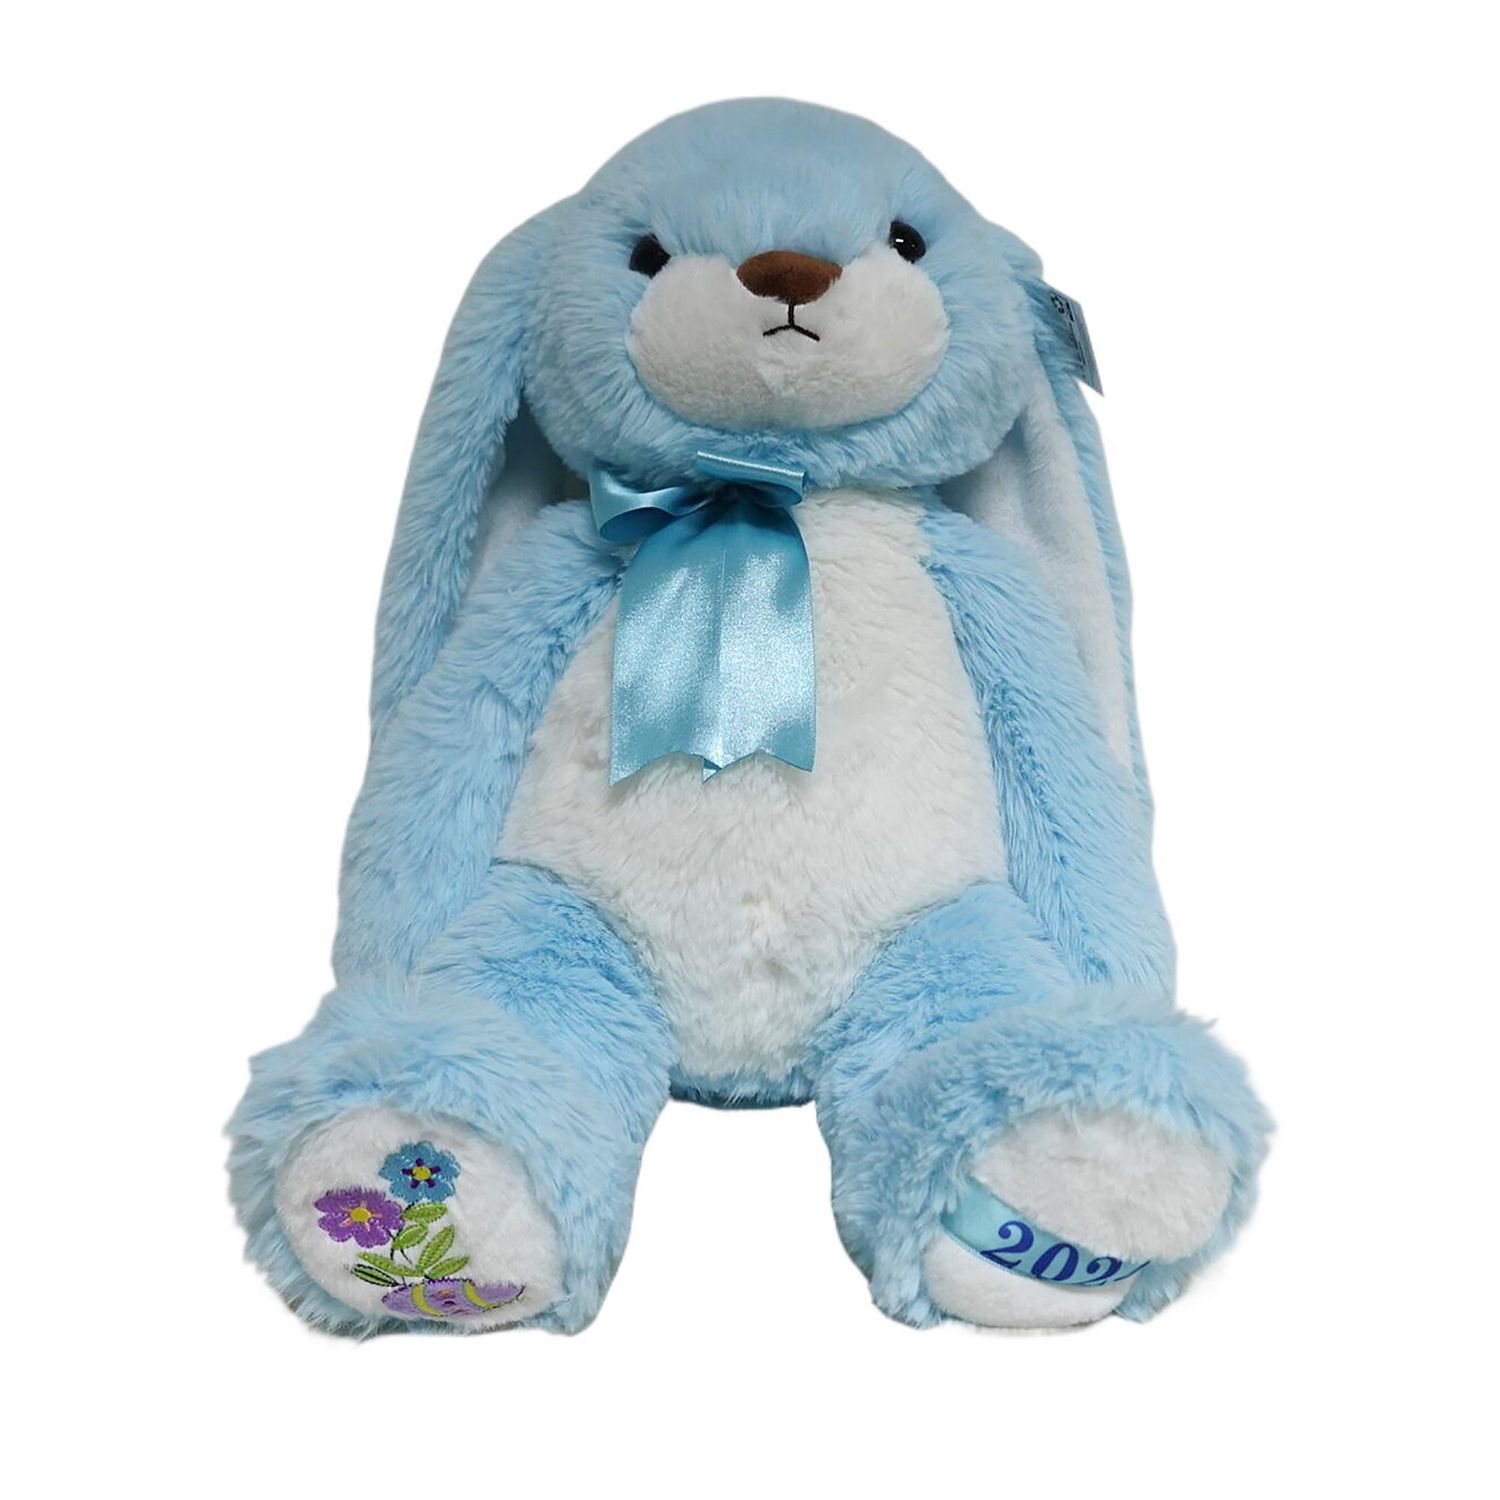 Way to Celebrate Large Plush Bunny With bow blue,20inch, Plush